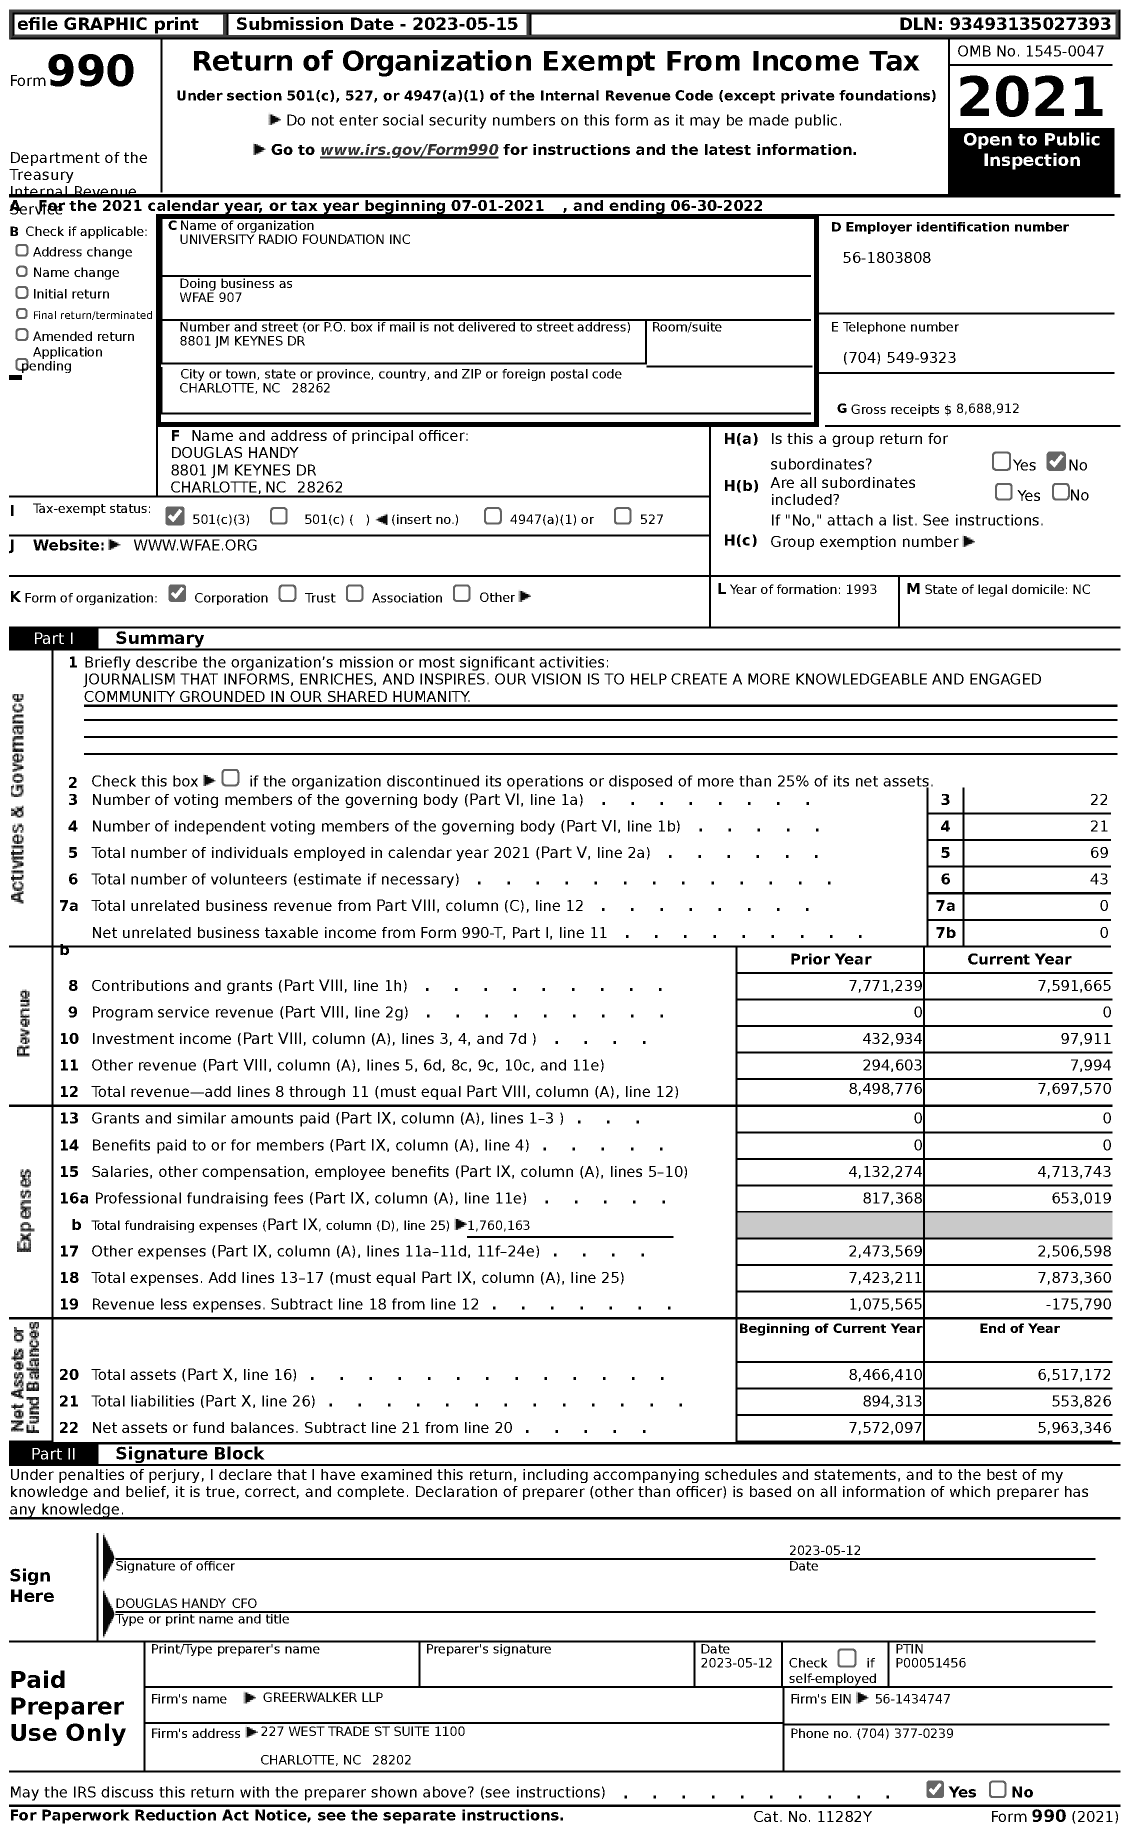 Image of first page of 2021 Form 990 for Wfae 907